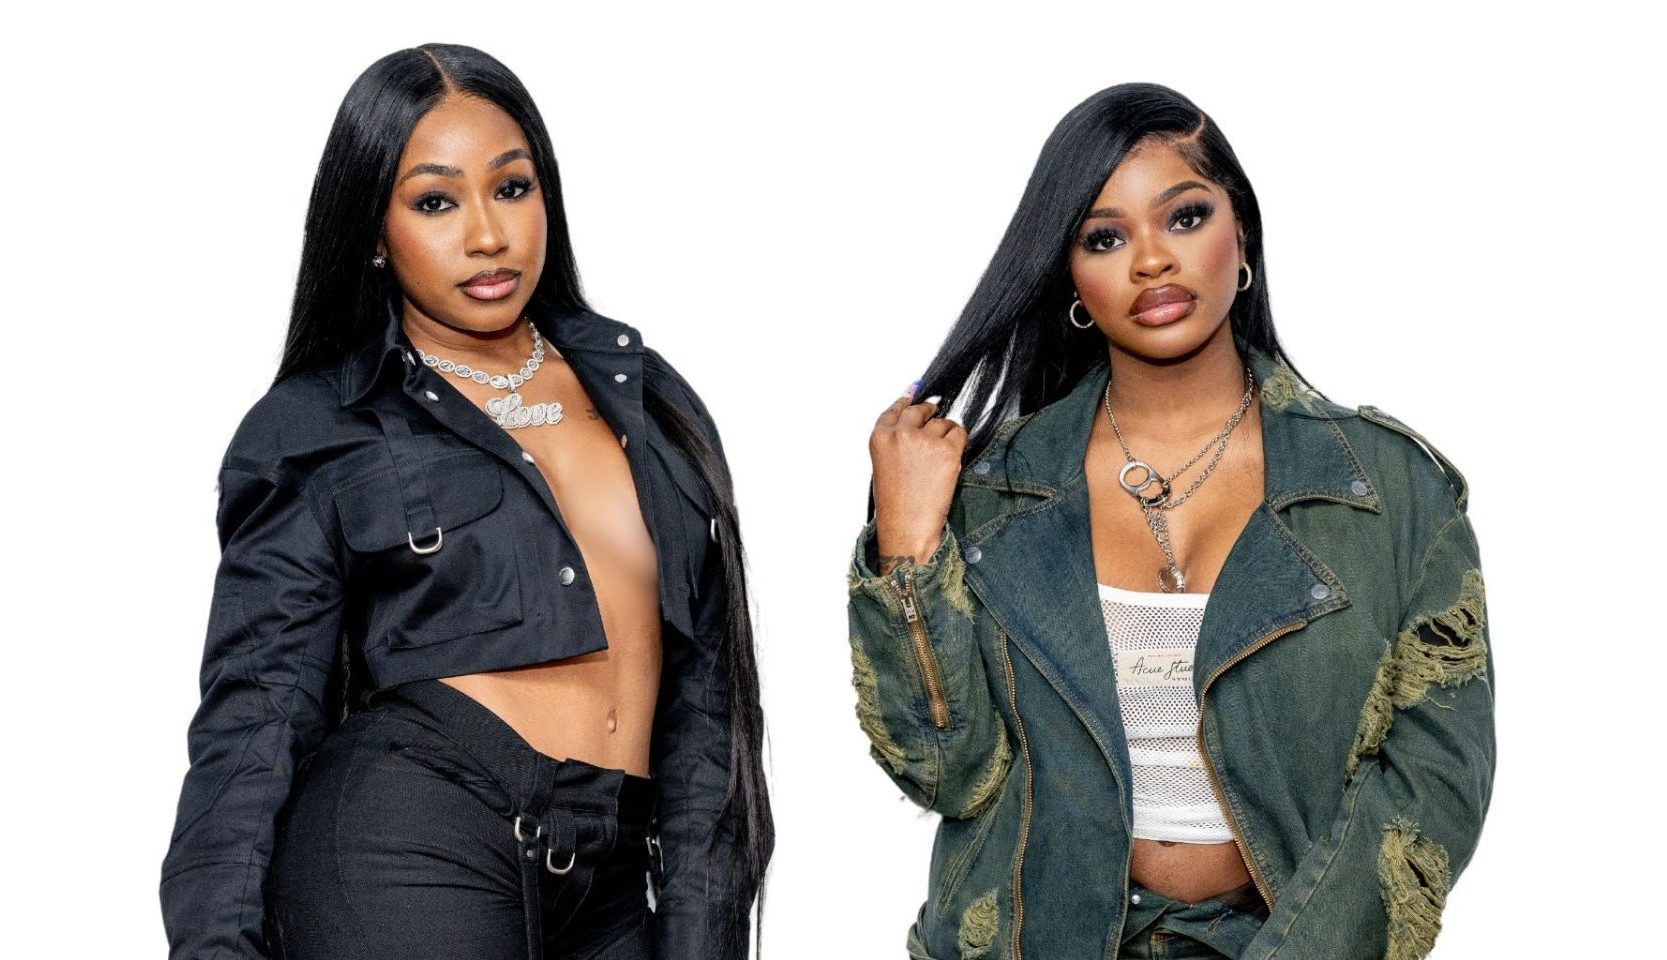 City Girls Era Over? Social Media Reacts As Yung Miami And JT Continue To Hype Their Solo Music